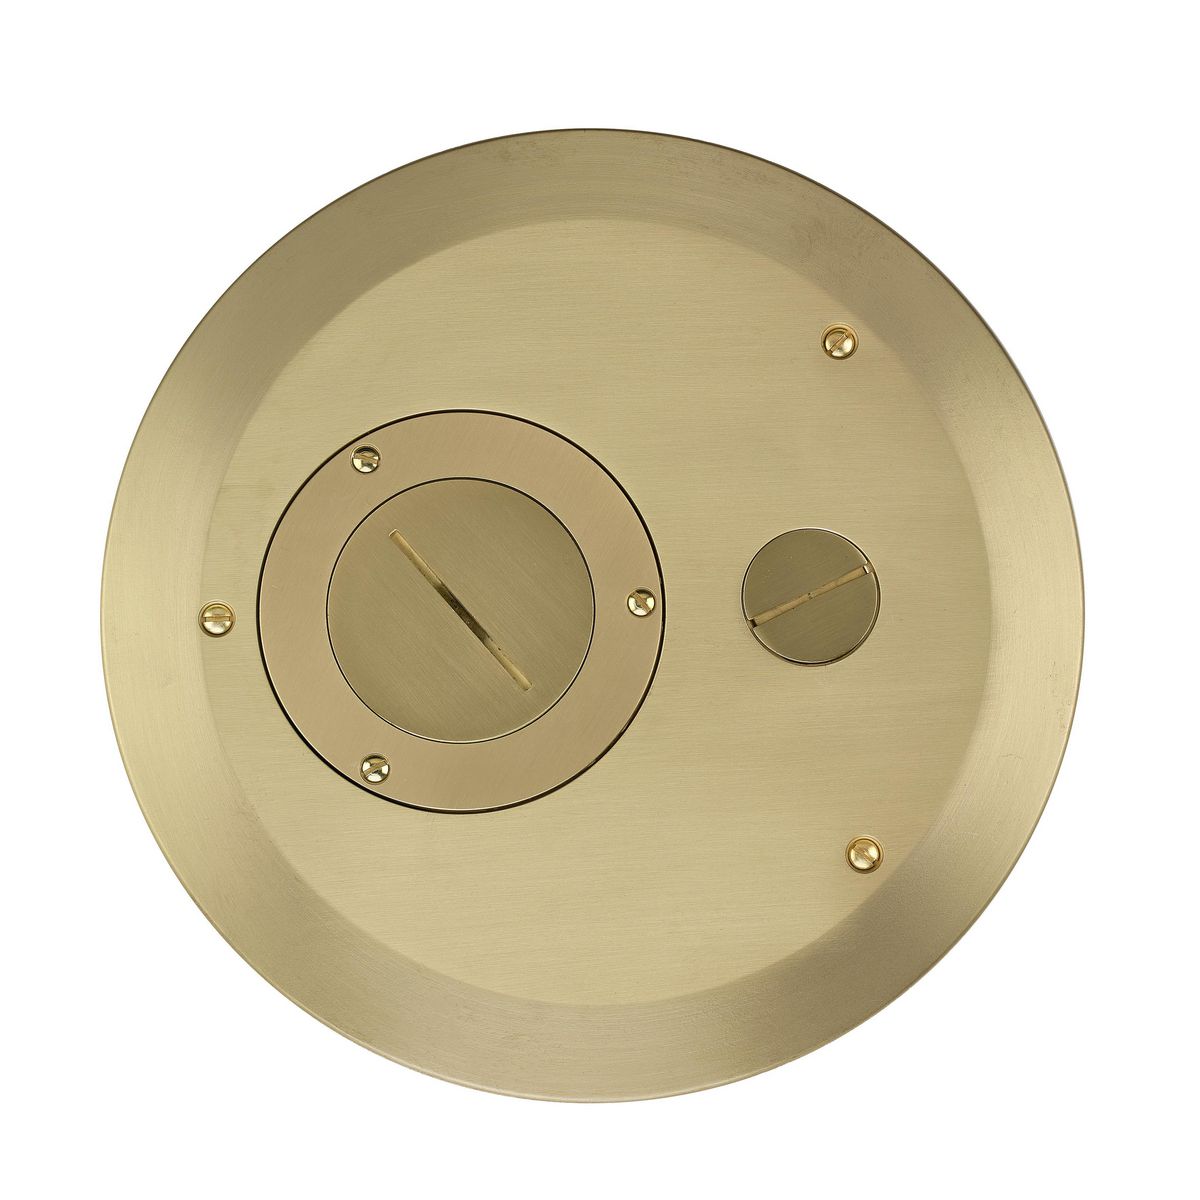 CFB ROUND 8 INCH FF COVER, BRASS